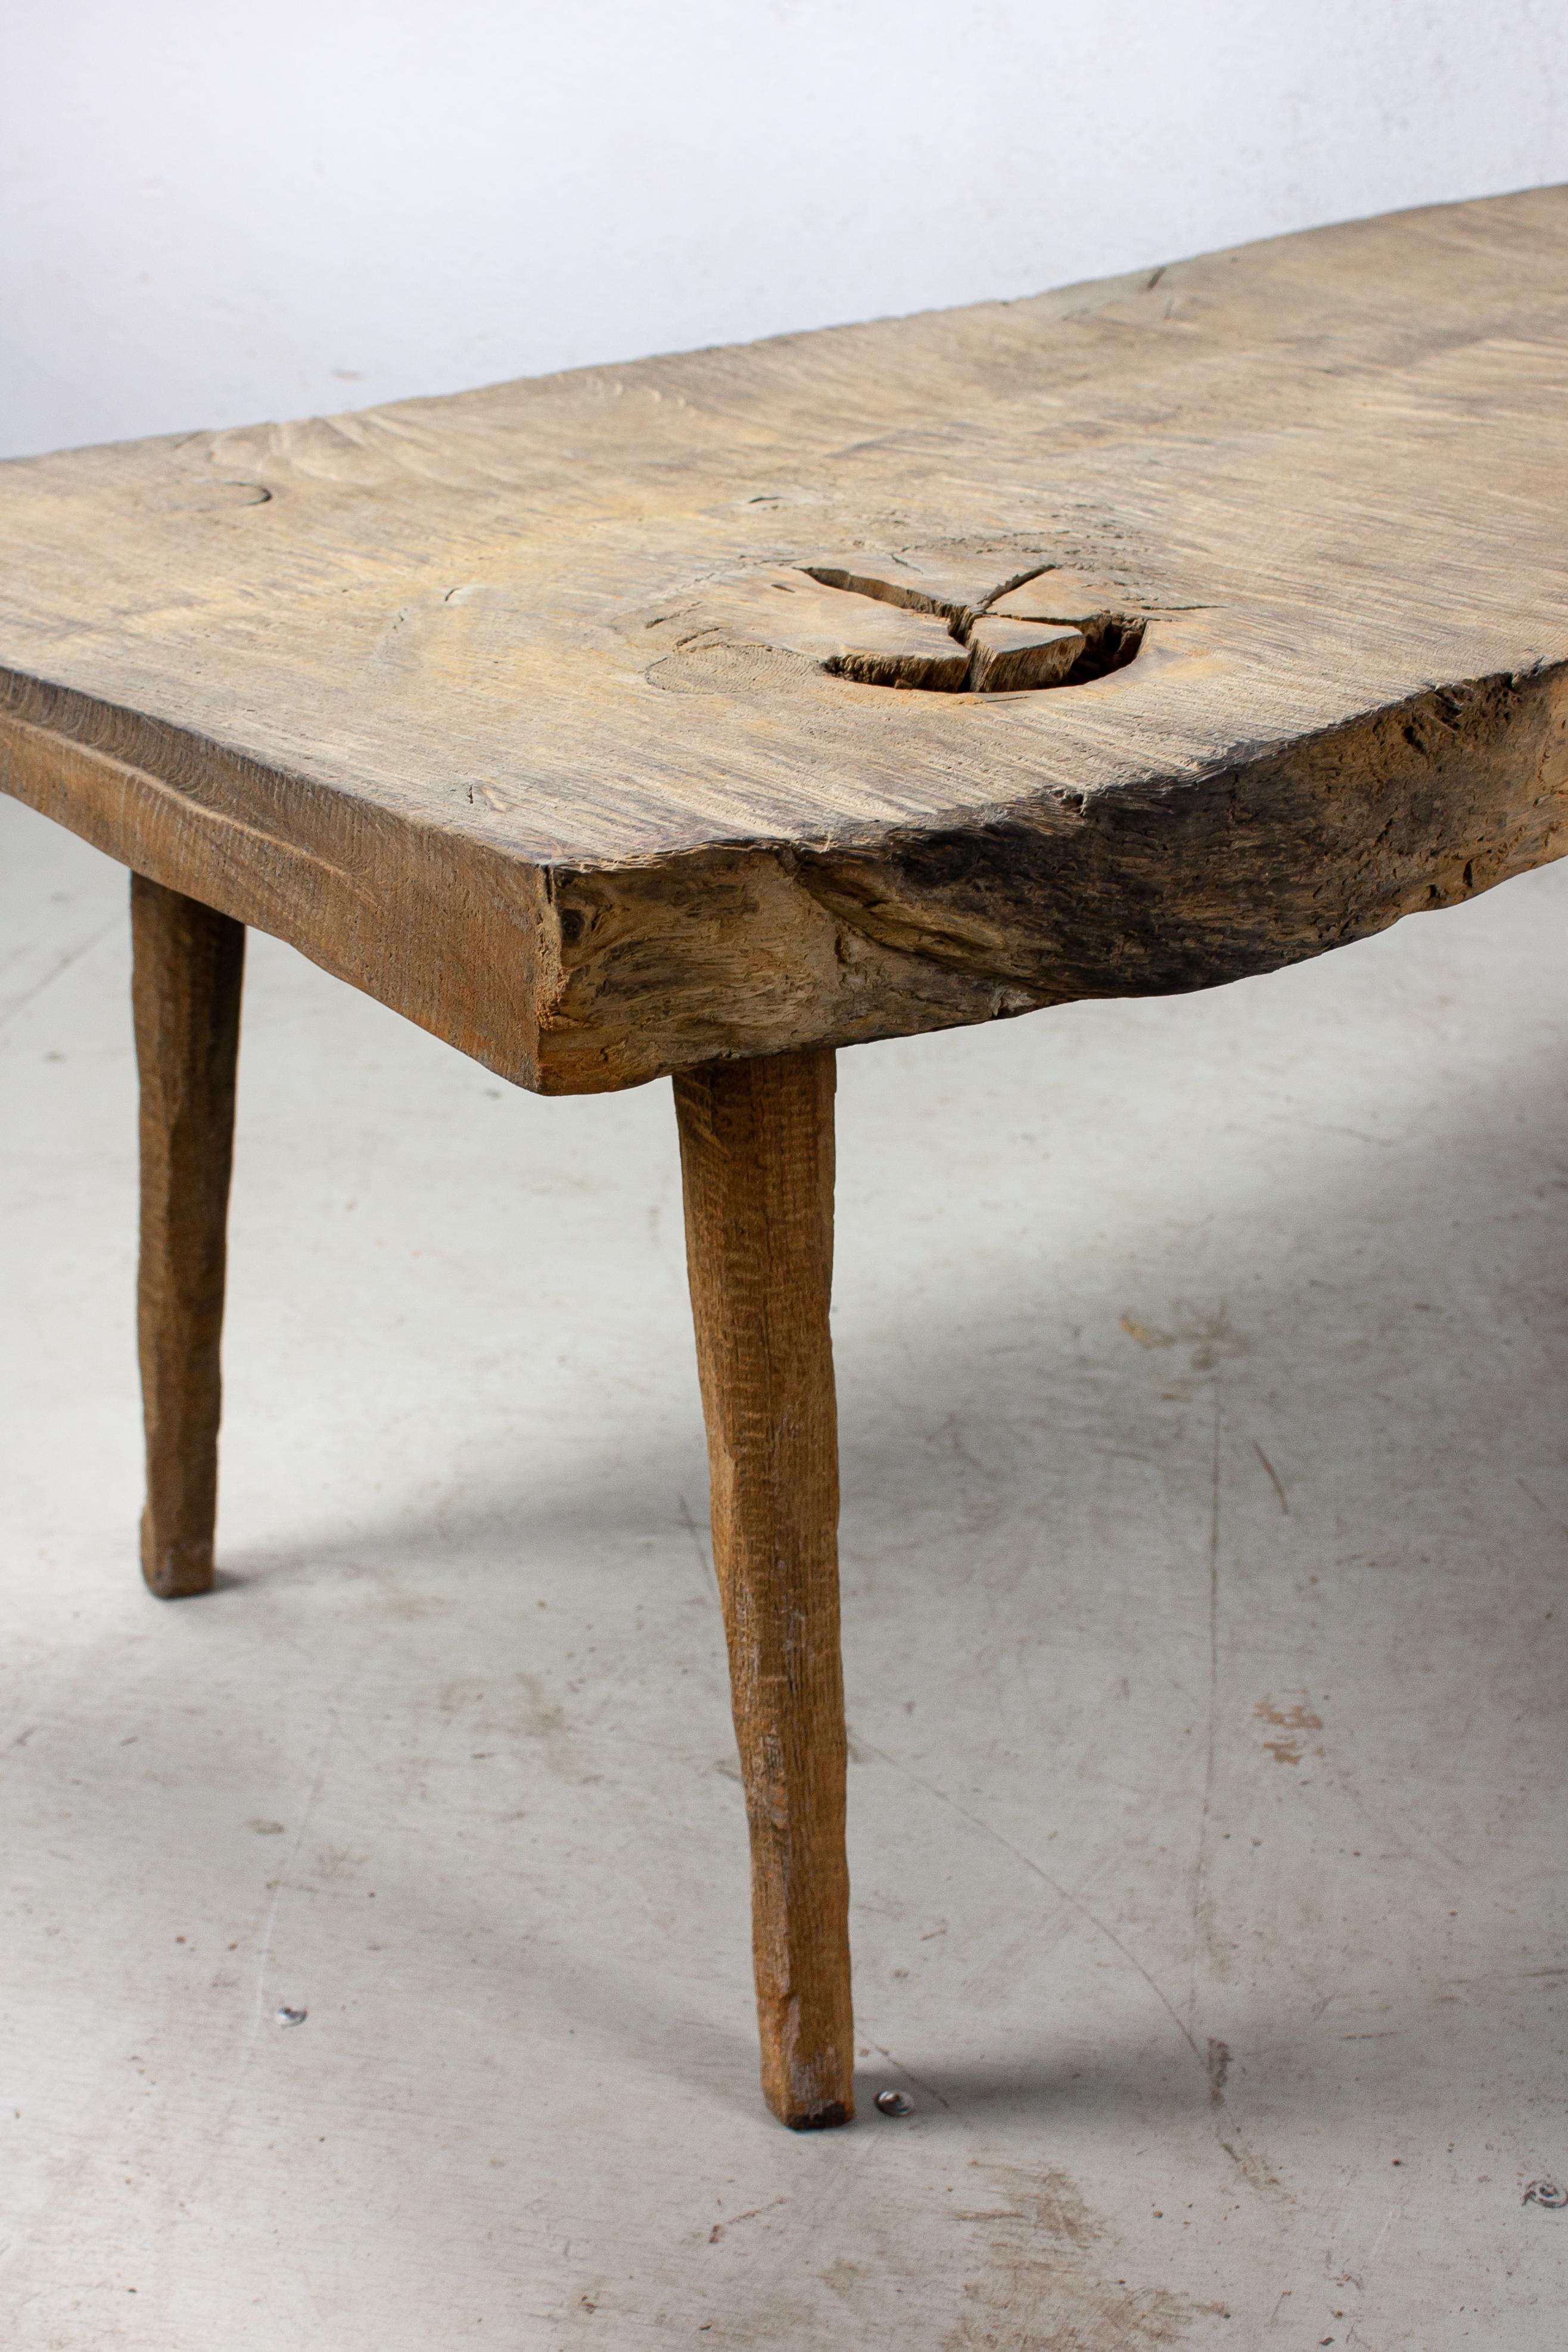 Russian Contemporary Brutalist Style Small Table #6 in Solid Oak and Linseed Oil For Sale